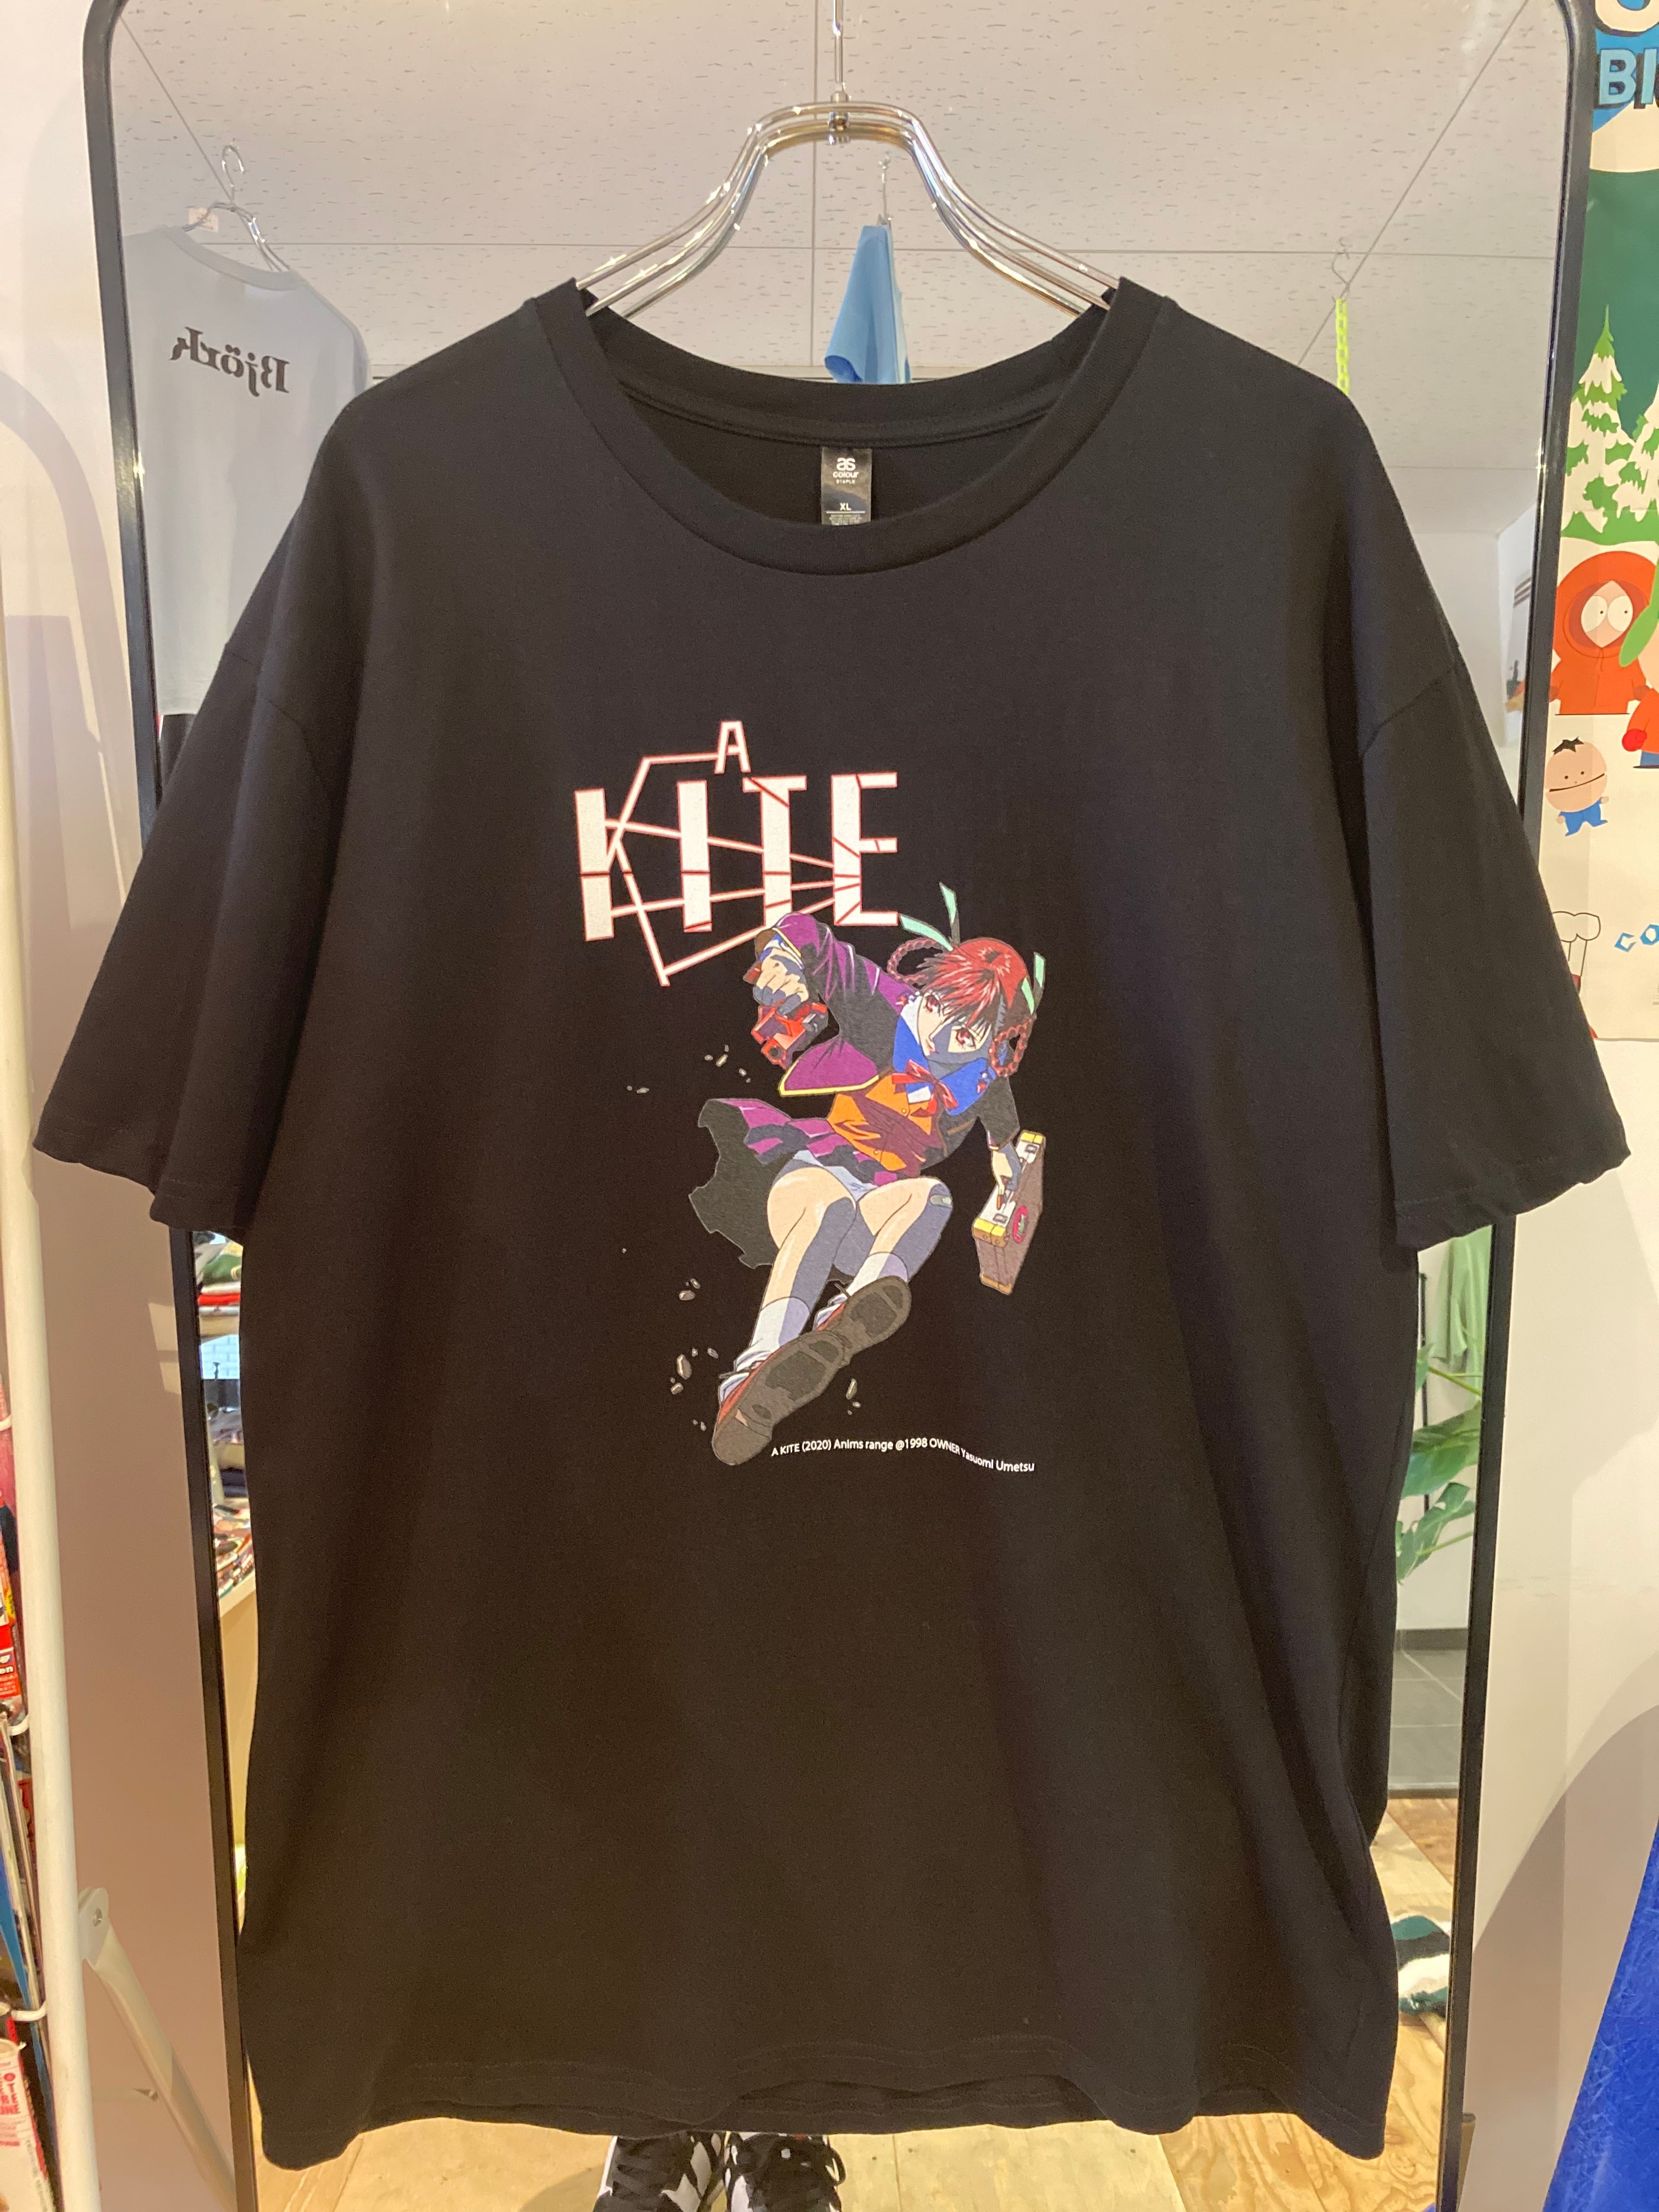 【SPECIAL】デッドストック 90s A KITE Tシャツ 梅津泰臣